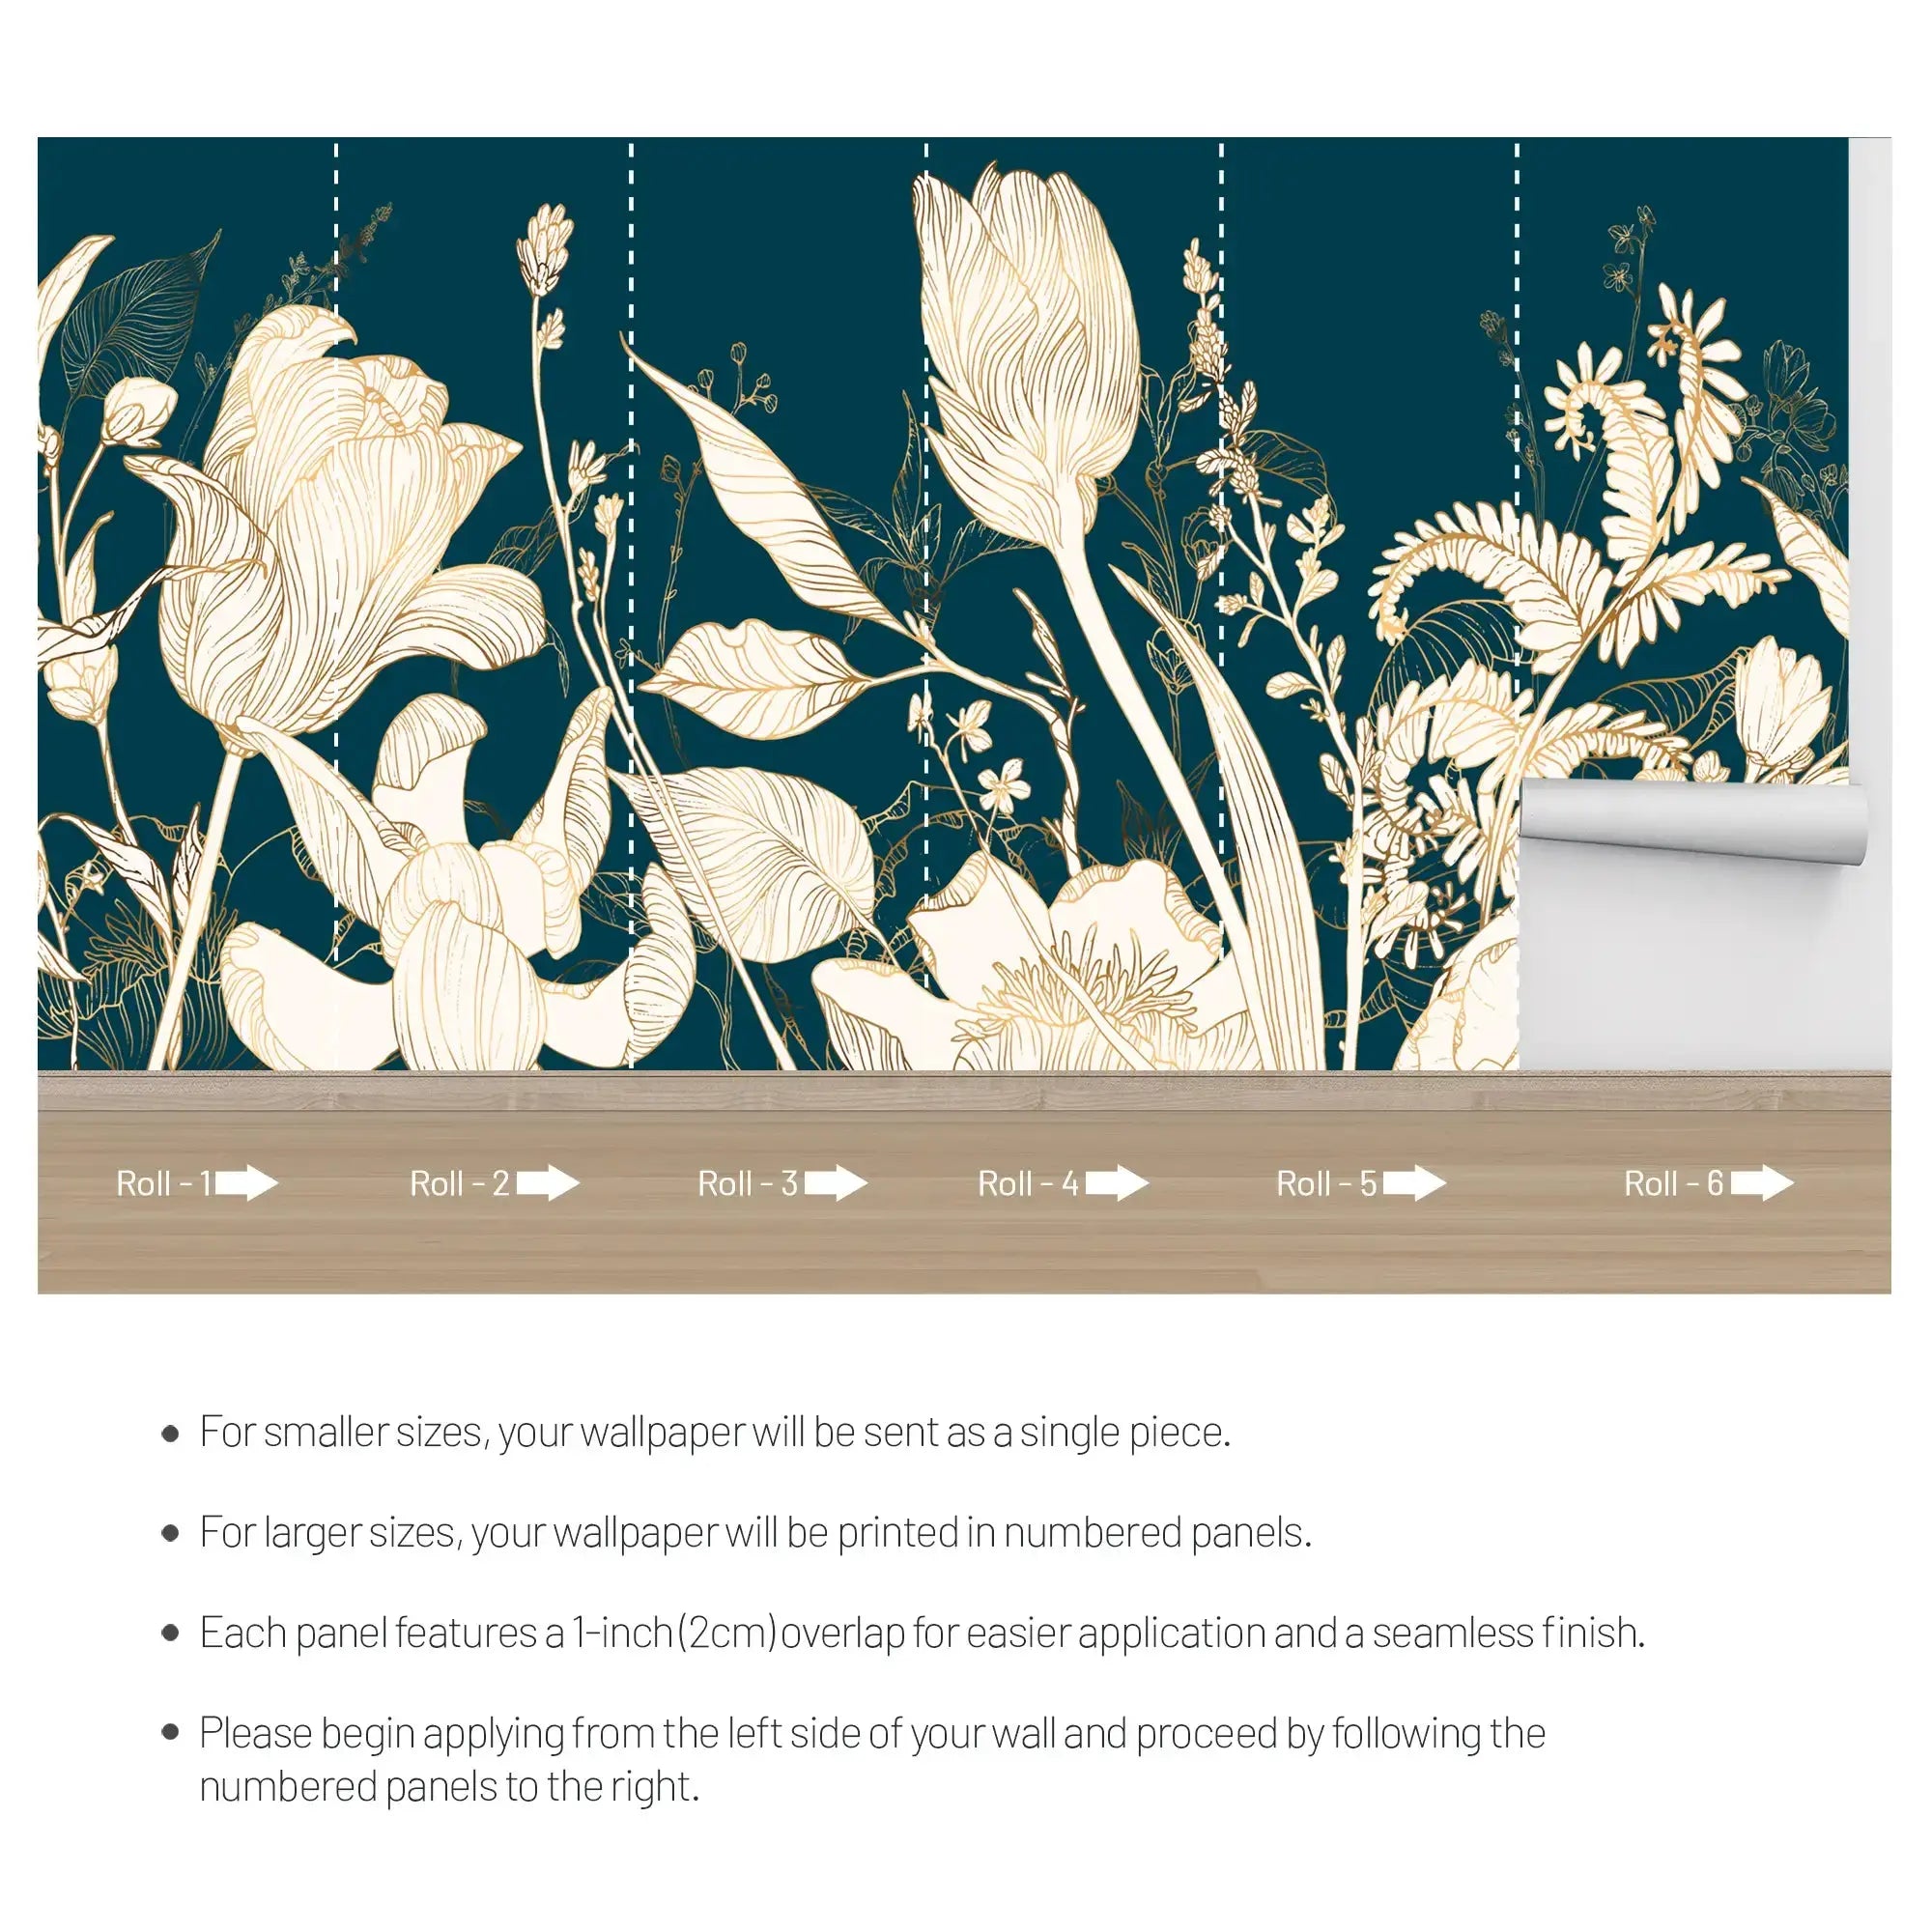 3113-C / Wild Floral Abstract Wallpaper: Peel and Stick Design for Modern Wall Decor in Any Room - Artevella